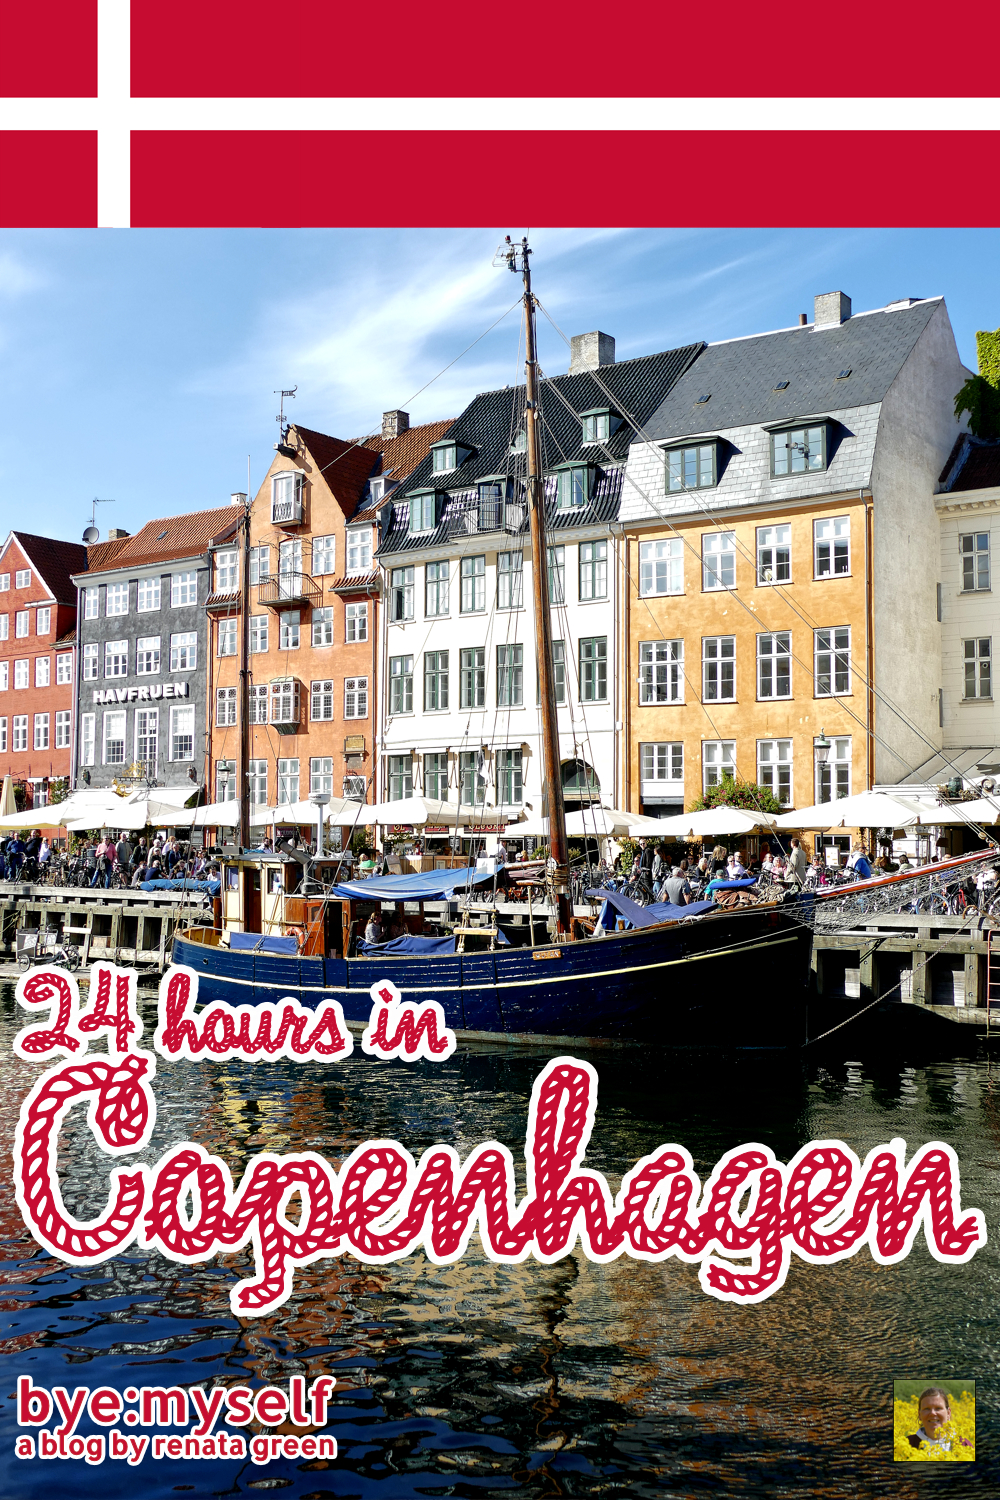 No matter for what reason you have a layover in Copenhagen: With my guide for up to 24 hours, you'll enjoy the city's best sides'n'sights. #copenhagen #denmark #europe #layover #stopover #24hours #daytrip #citybreak #weekendtrip #byemyself